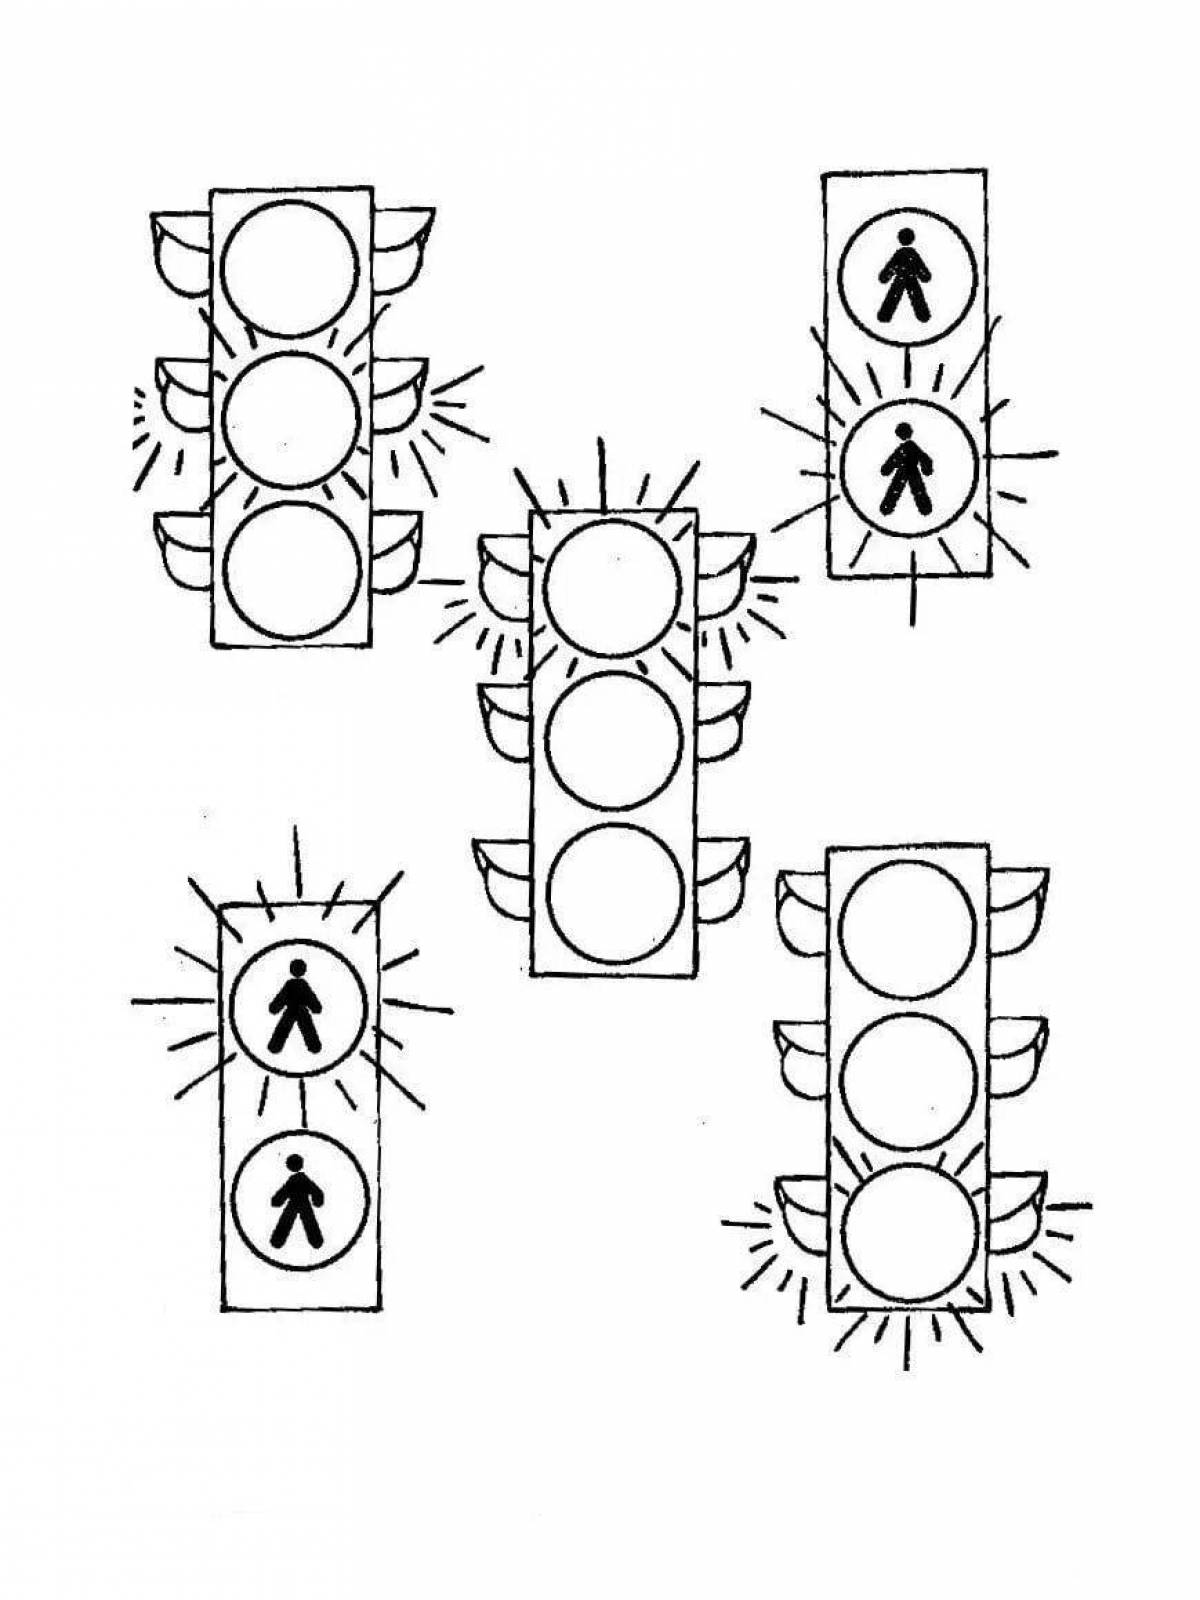 Shining Traffic Light Coloring Page for Toddlers 2-3 years old